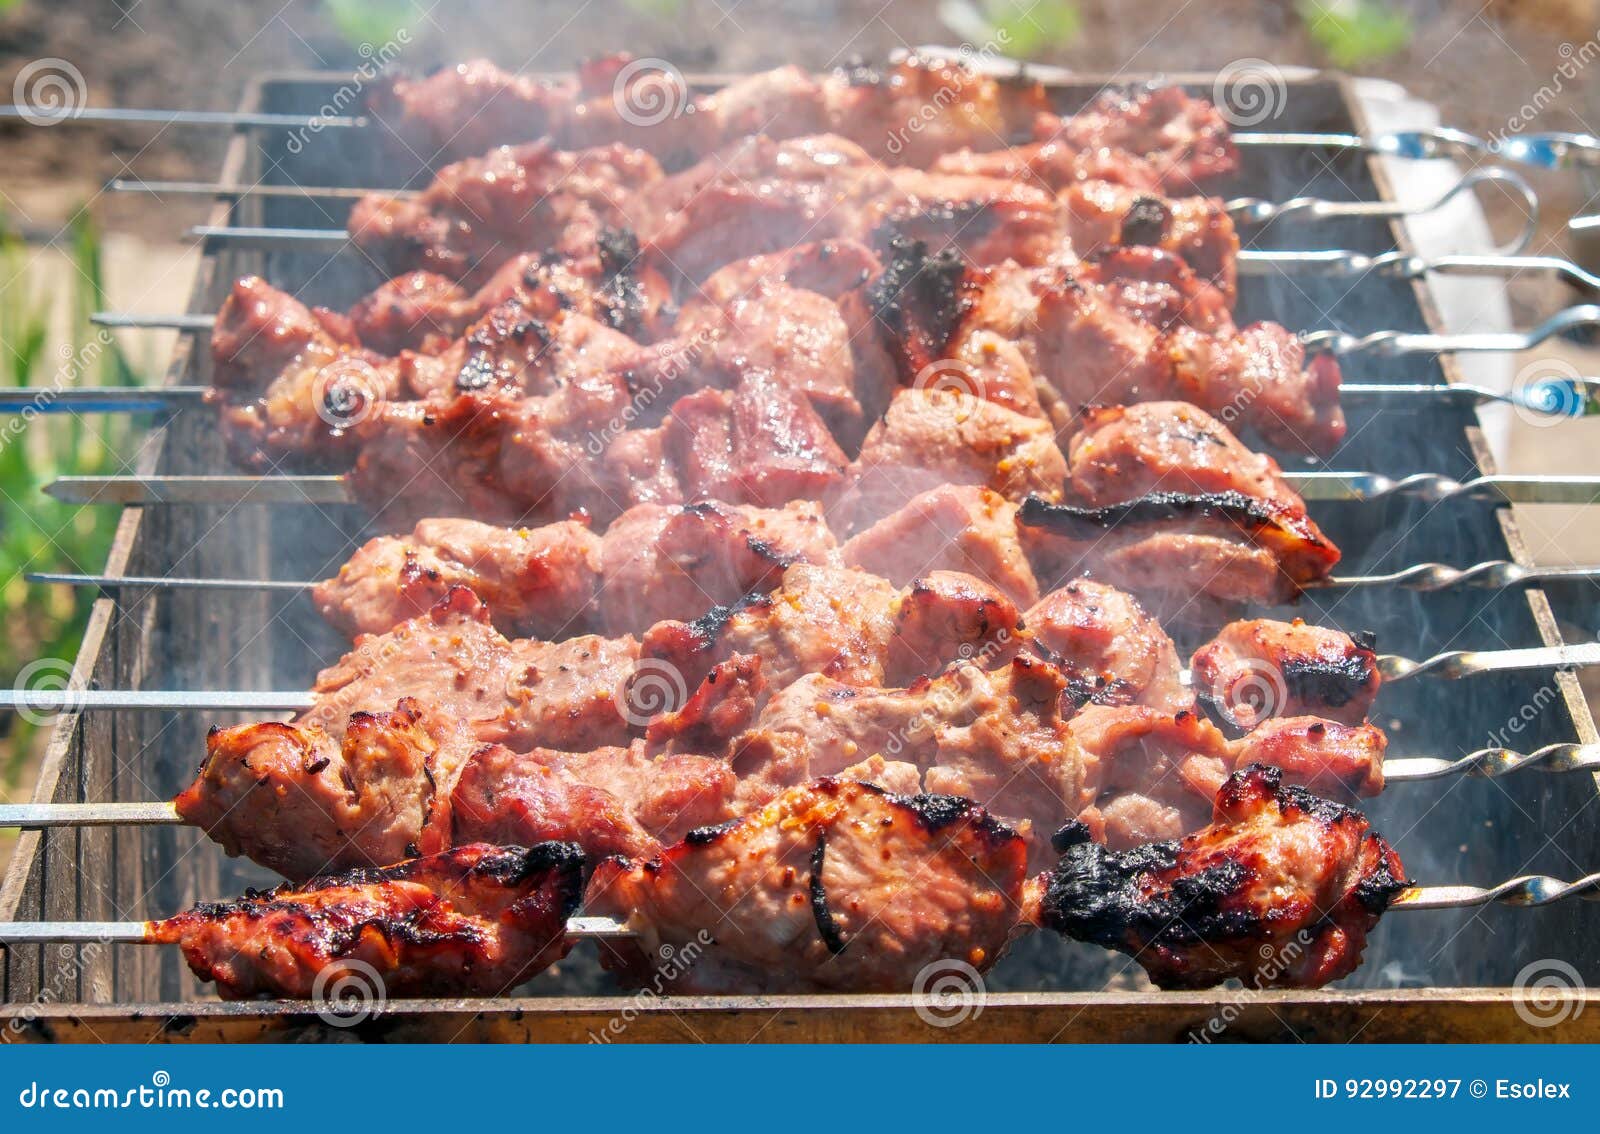 Shish Kebab is Baked Over a Fire with Smoke. Stock Image - Image of ...